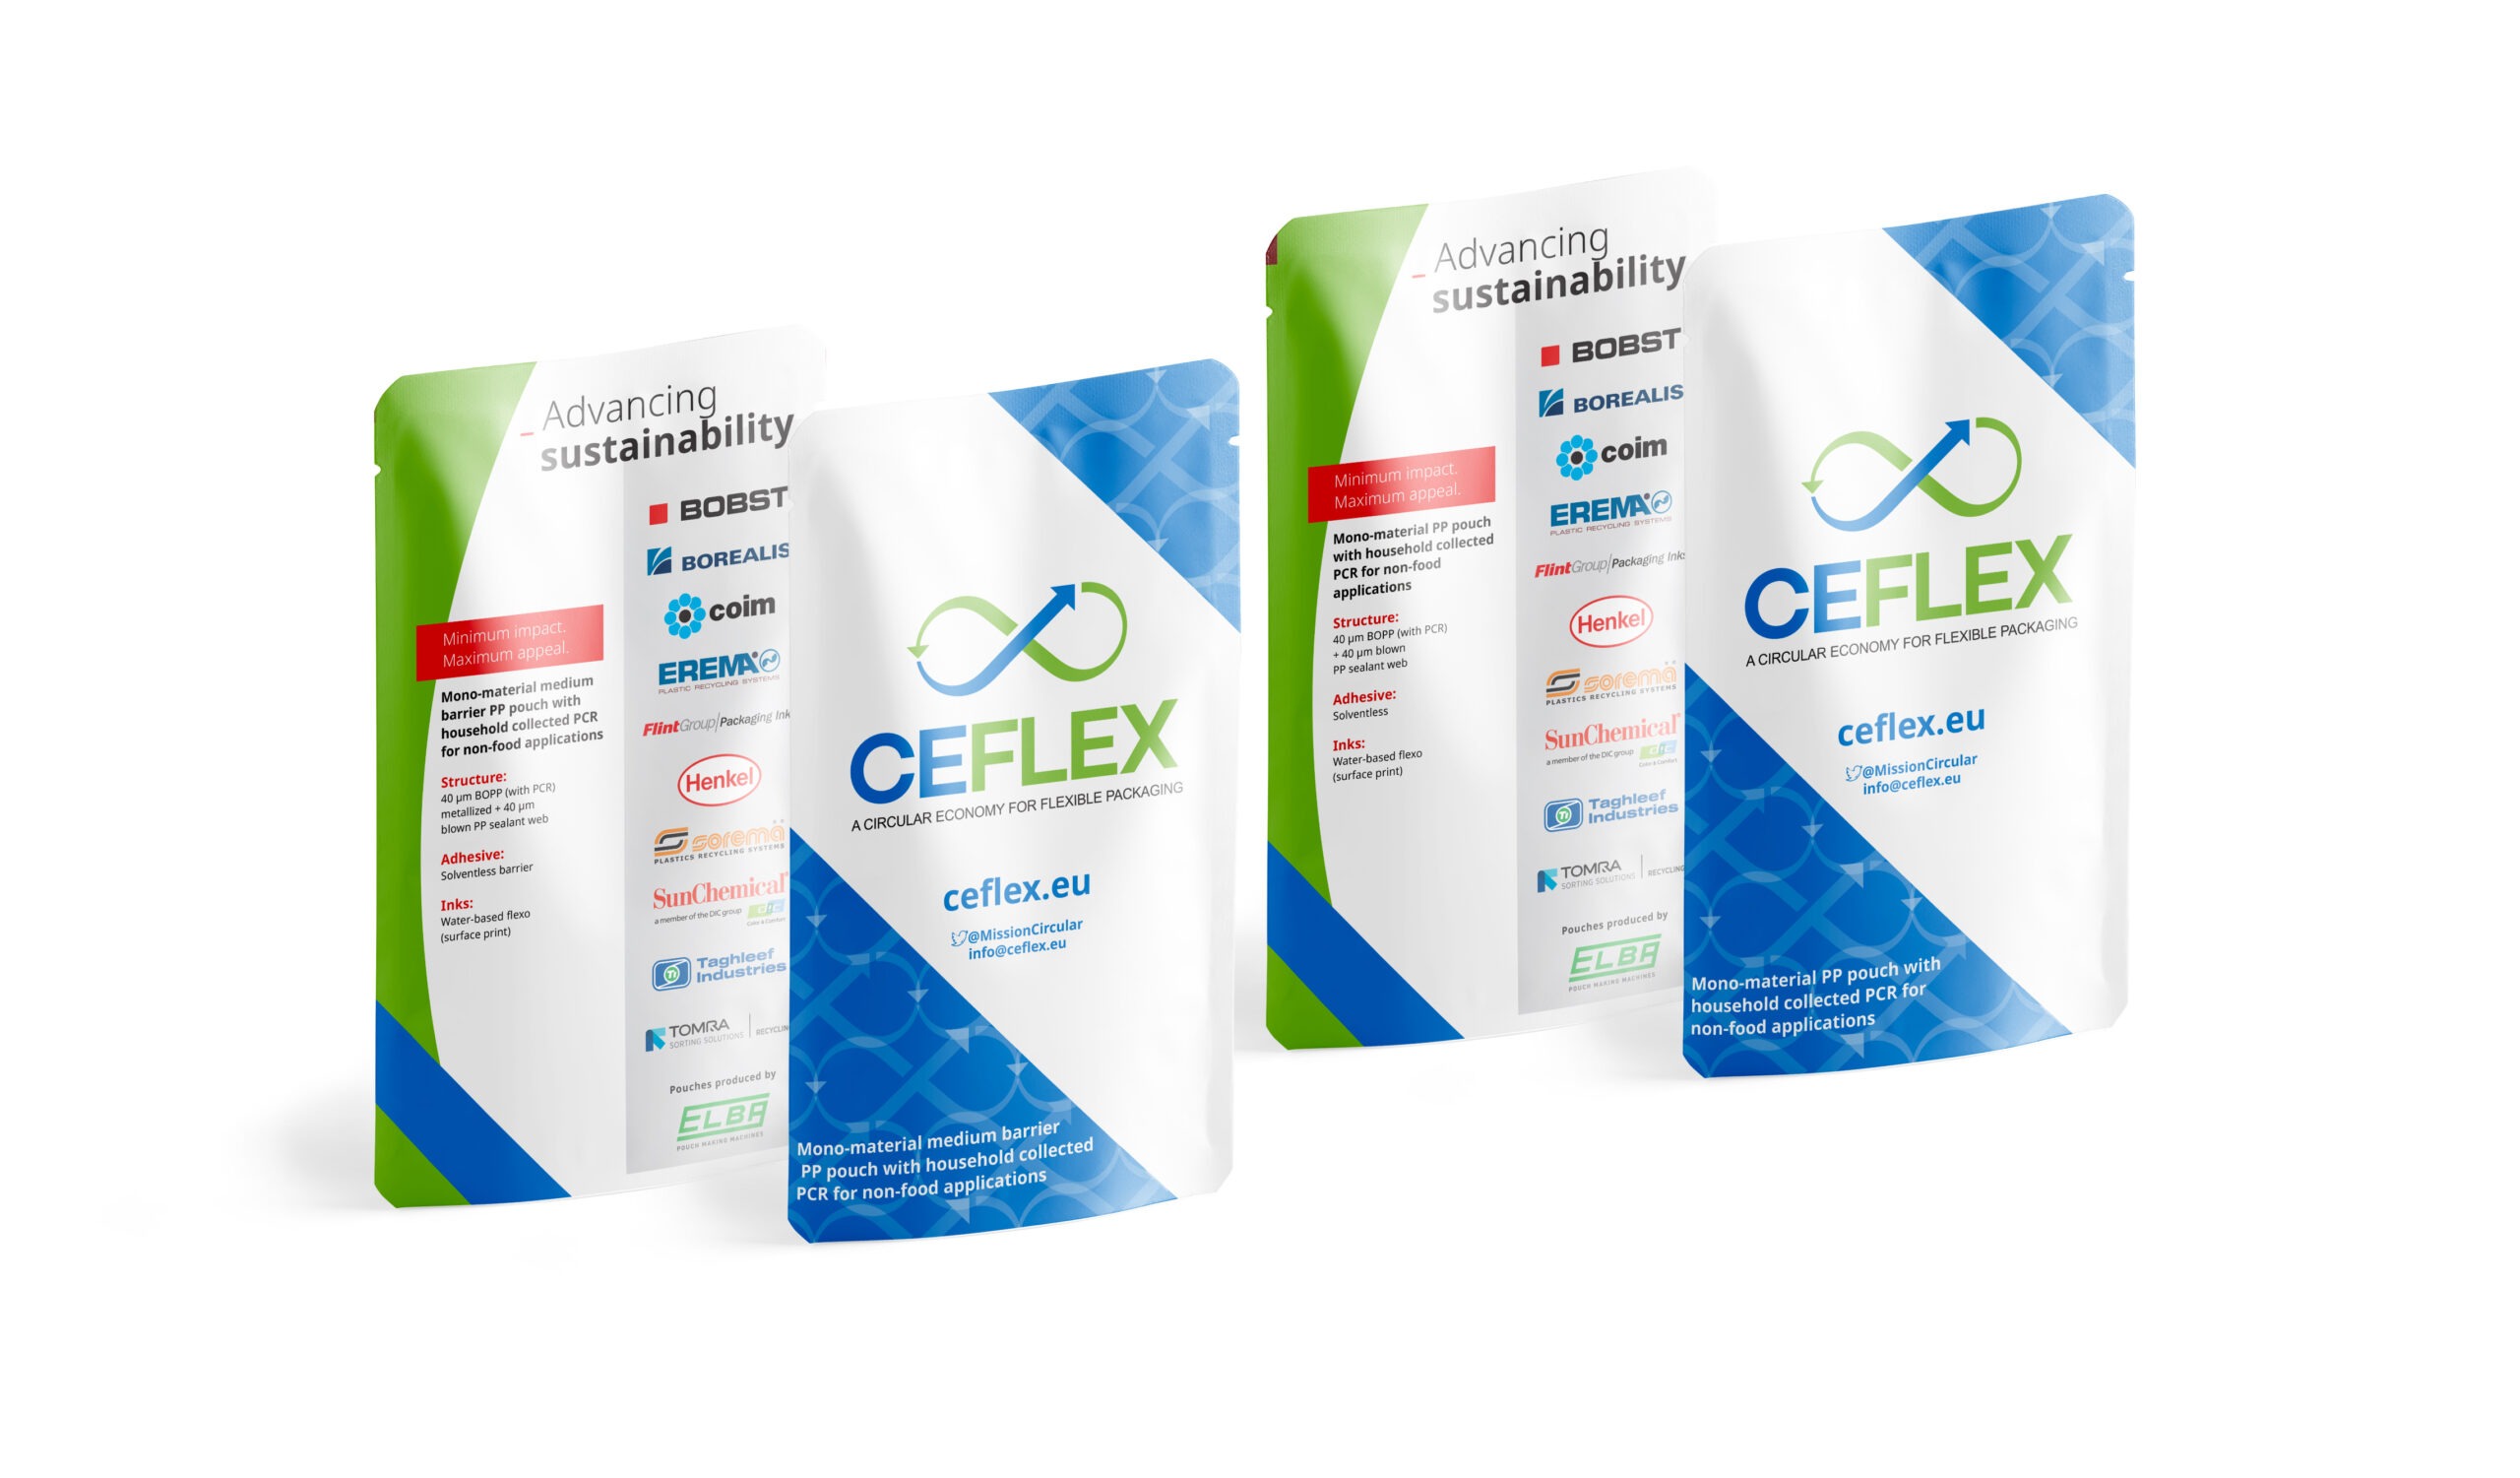 Flint Group Participates in CEFLEX’s Quality Recycling Project